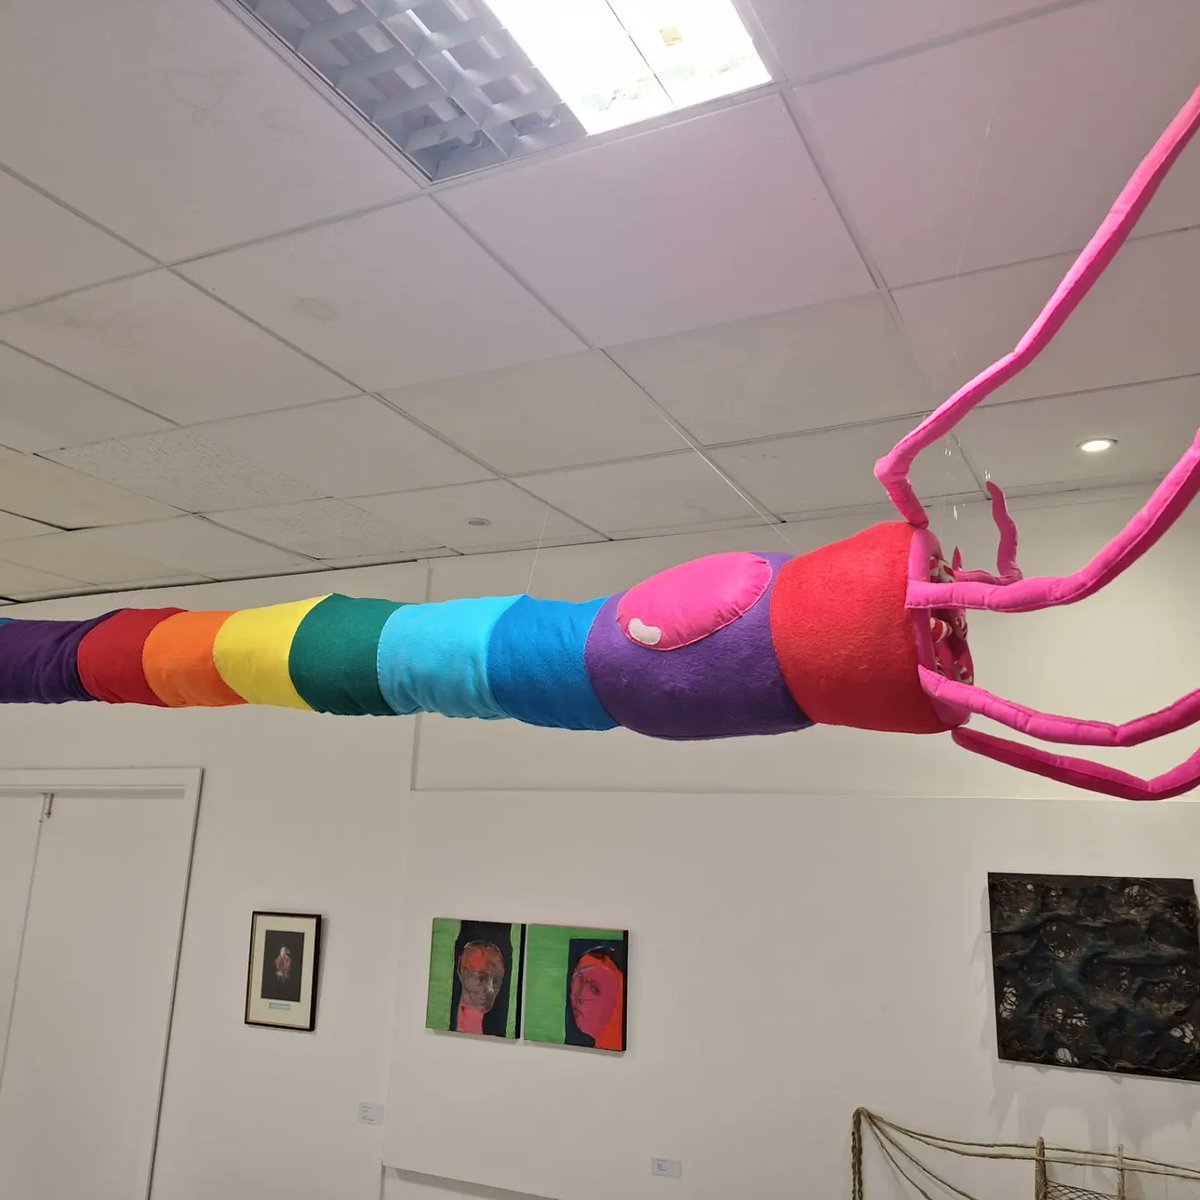 Annelid Saccharo. Felt, Thread, Polyester. This colourful candy creature is on display @ArtsBkb alongside wonderful artworks by my studio mates as part of @Phizzfest this weekend. It opens today at 6pm and continues until Sunday.